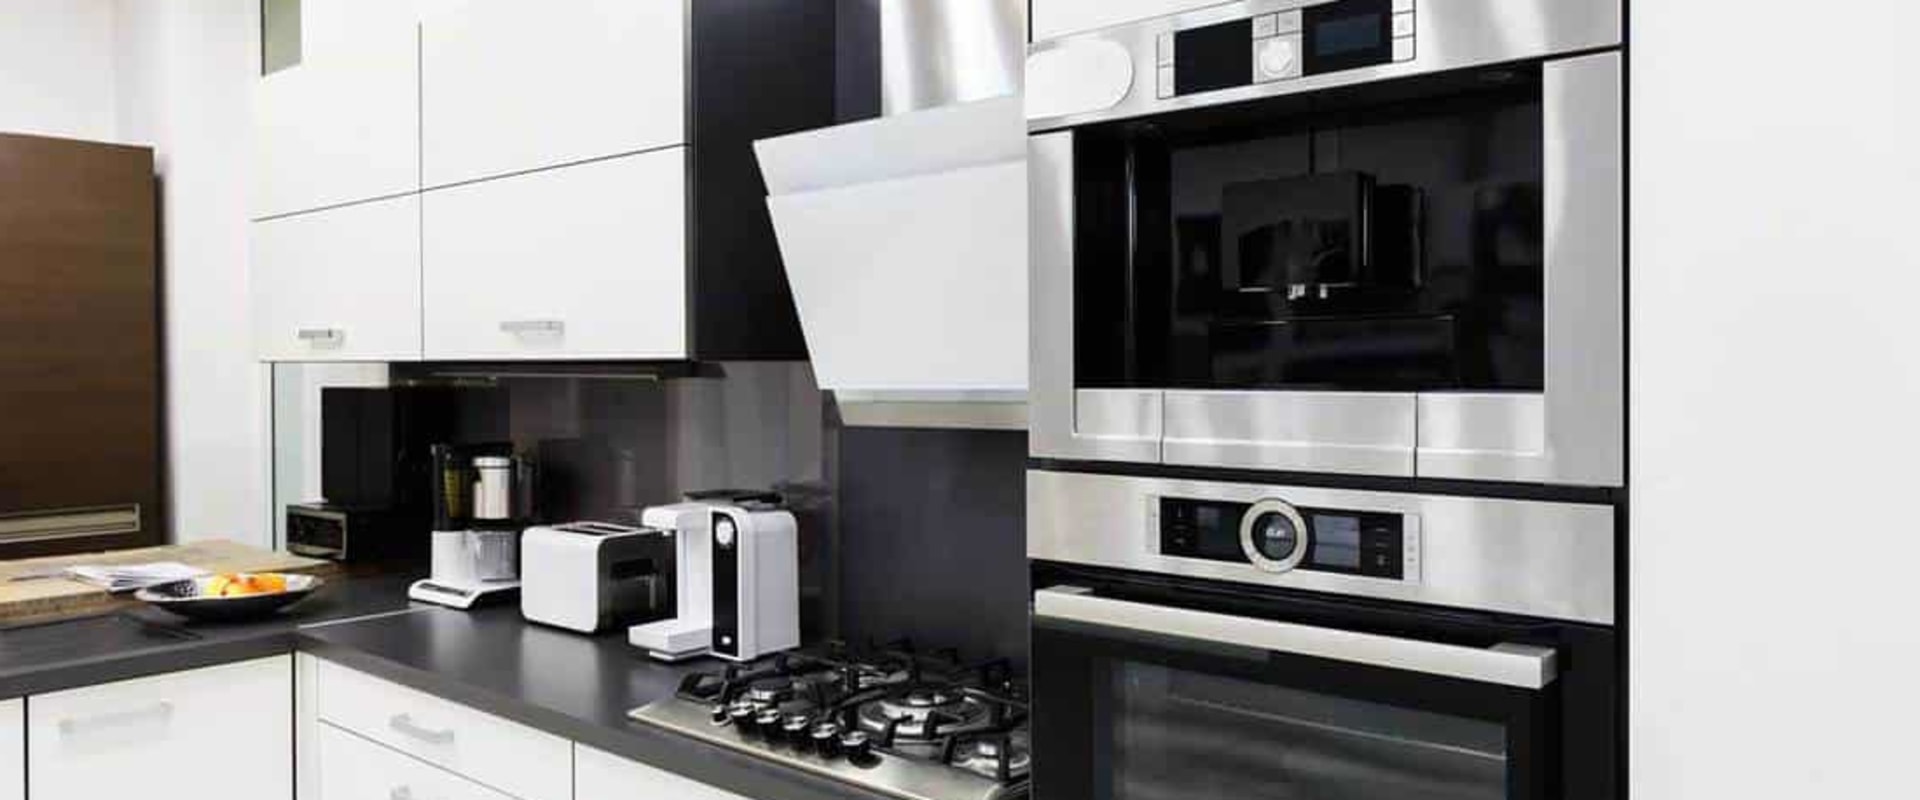 Do All Kitchen Appliances Need to Match?